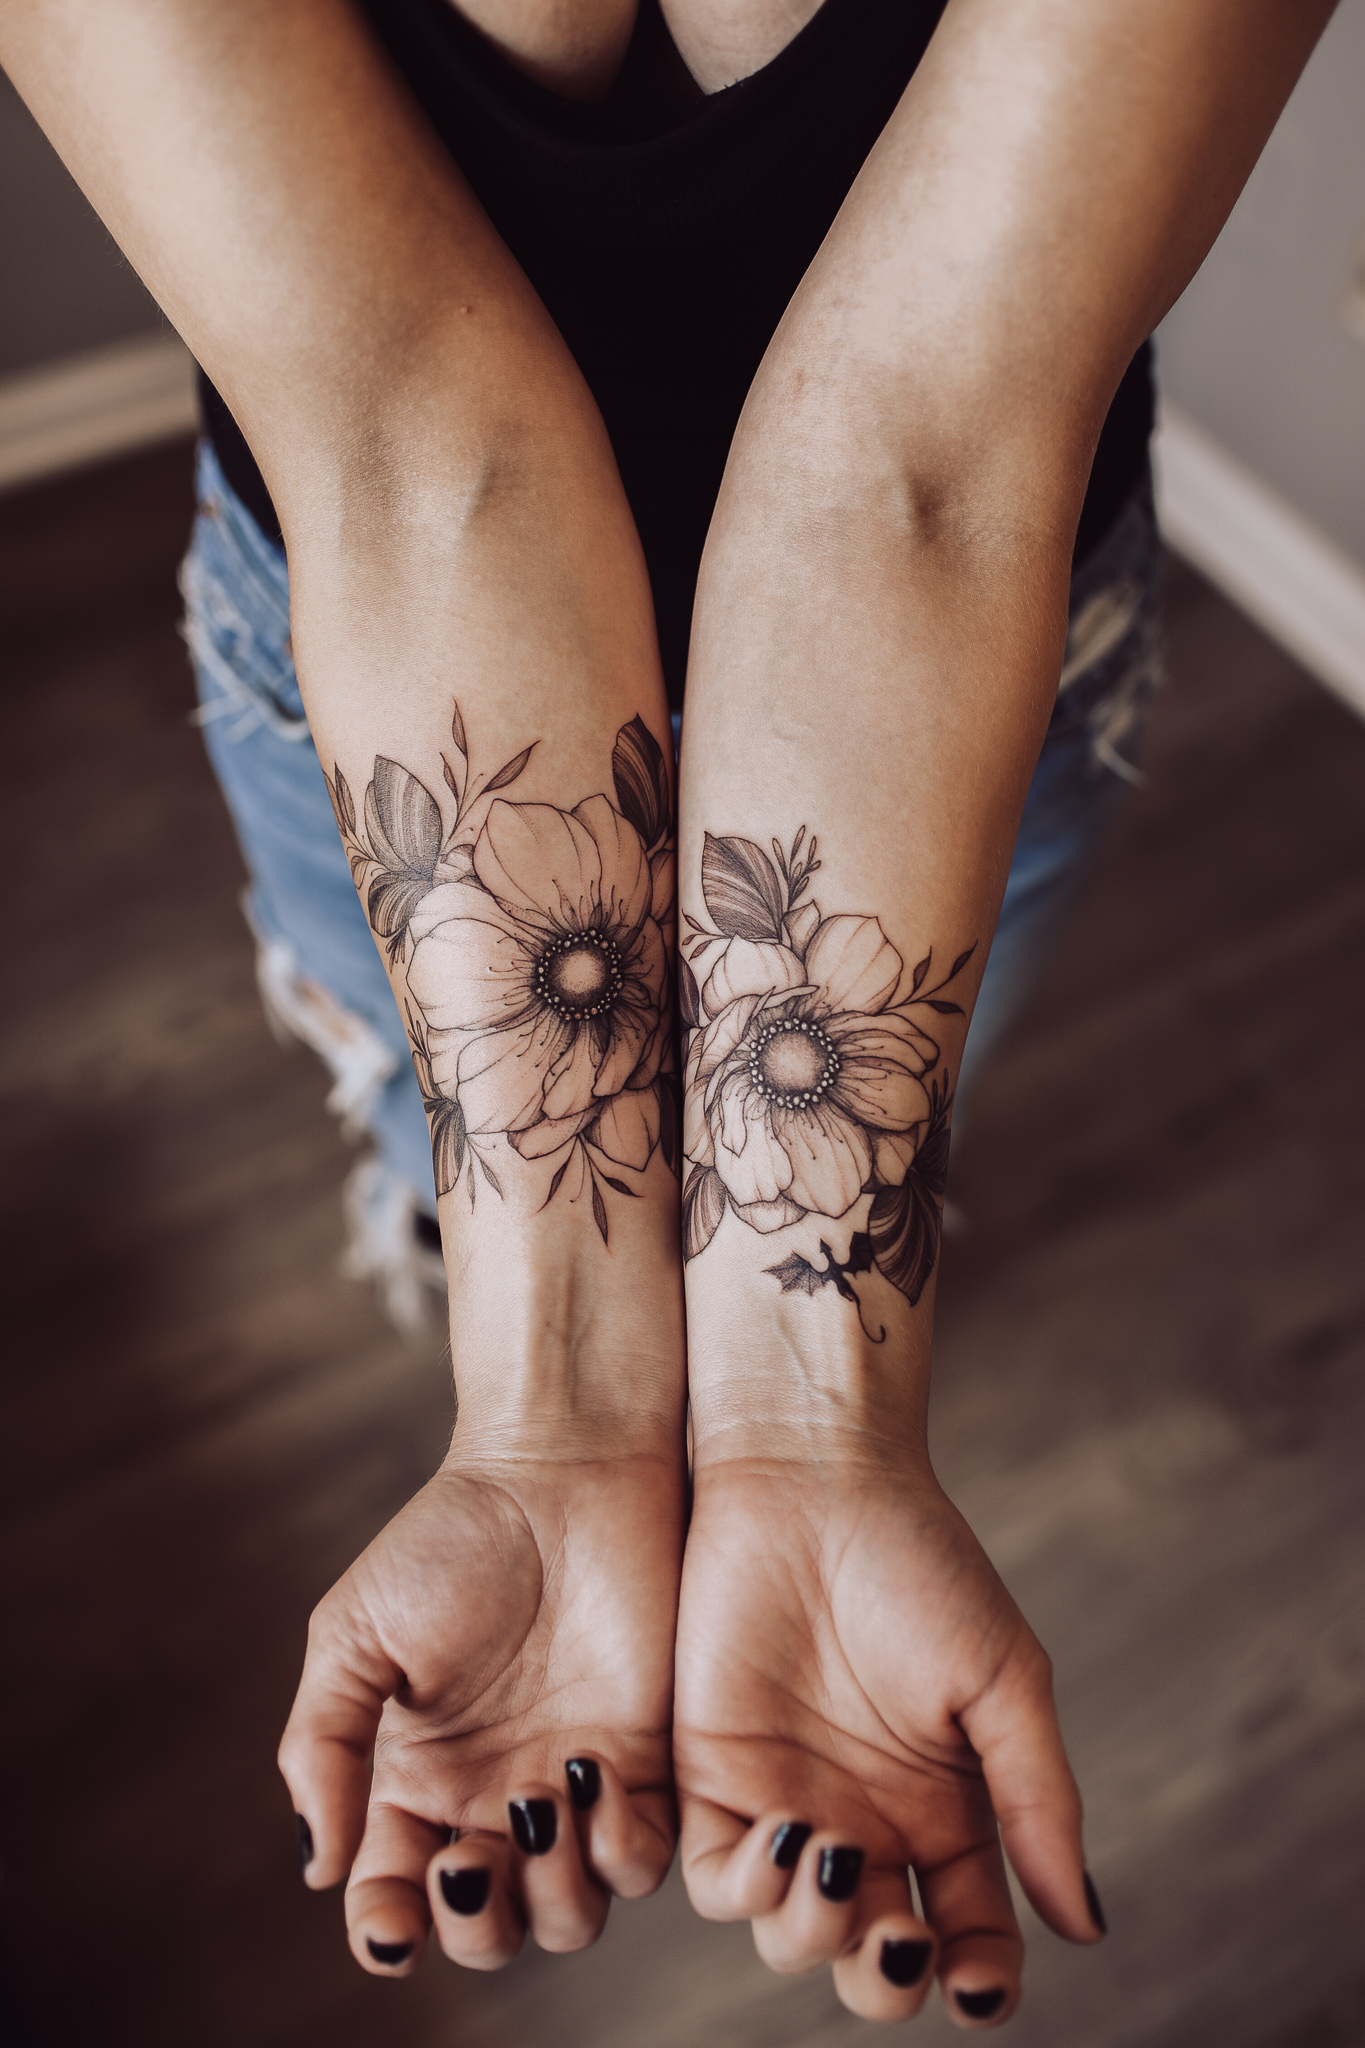 100 SingleLine Tattoos That Are FineLine Perfection  Bored Panda